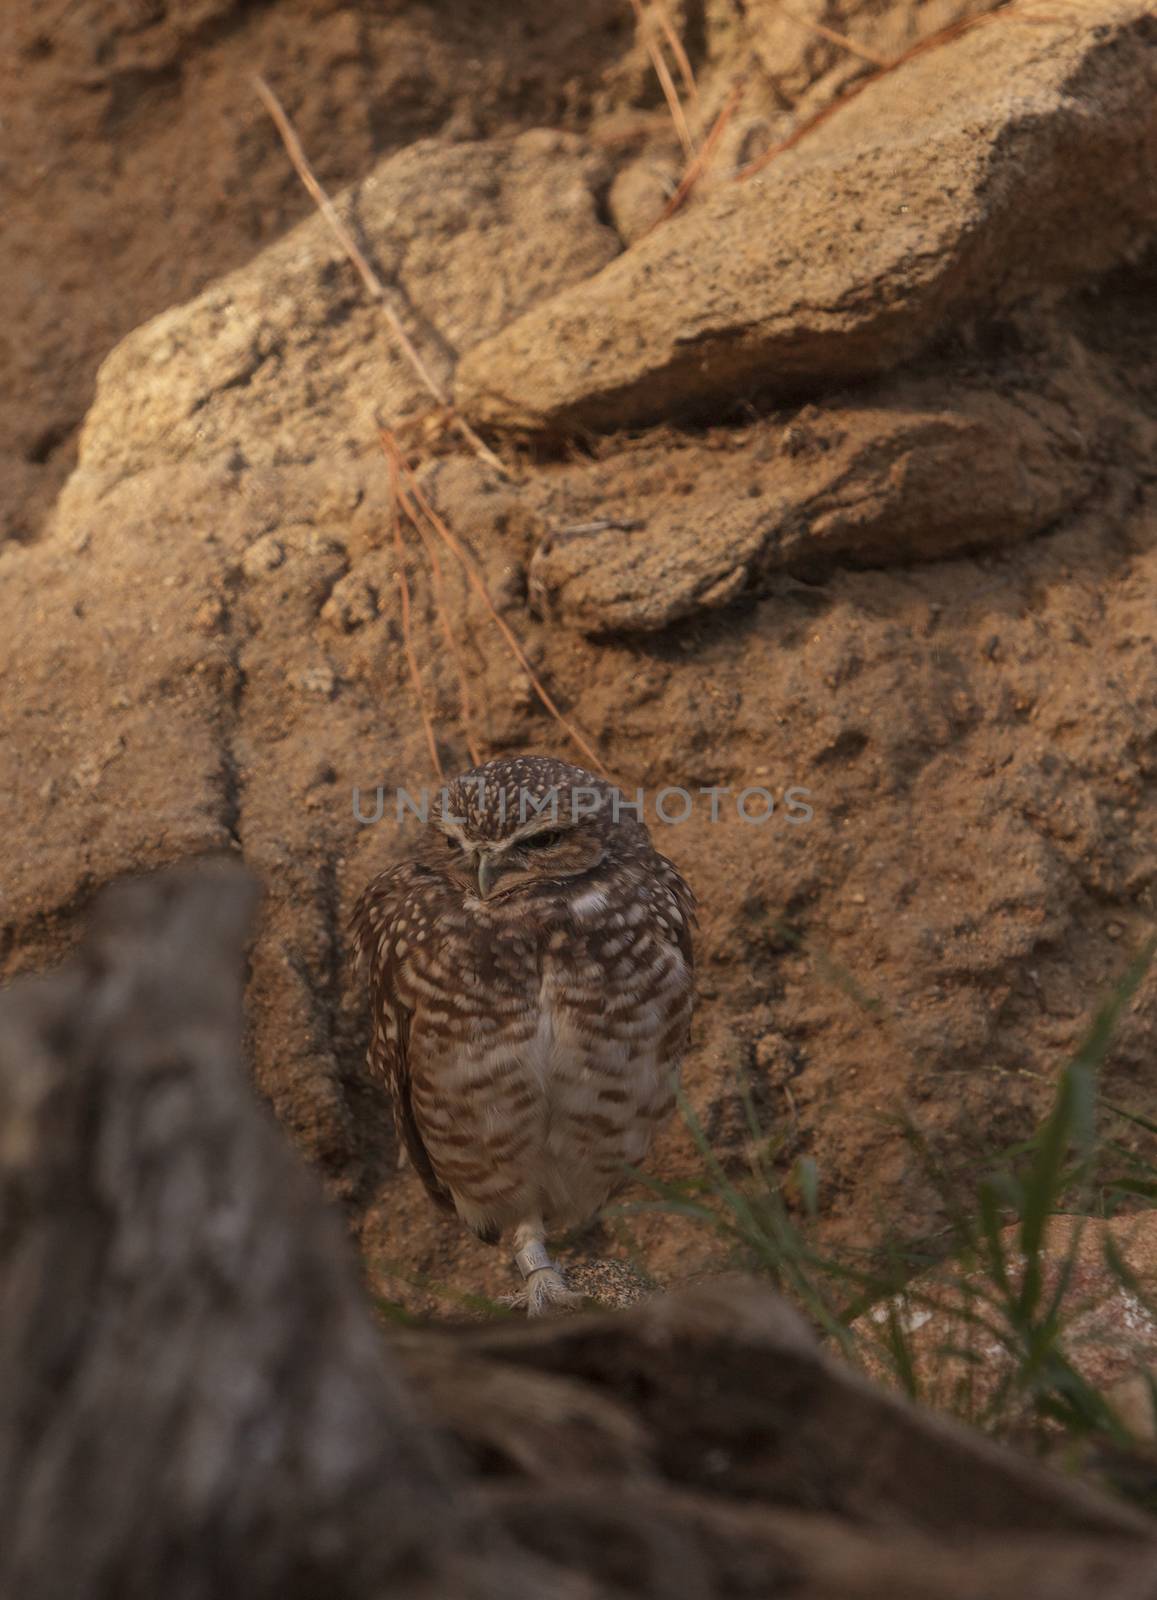 Burrowing Owl, Athene cunicularia by steffstarr